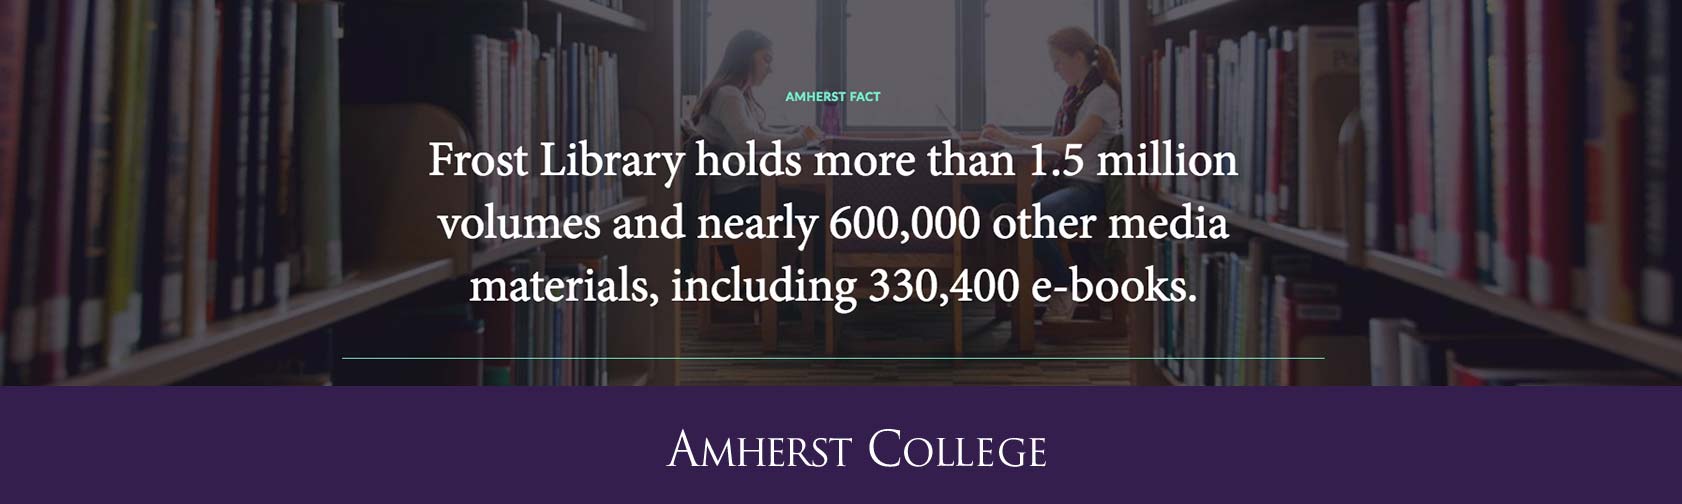 Frost Library Collections Fact